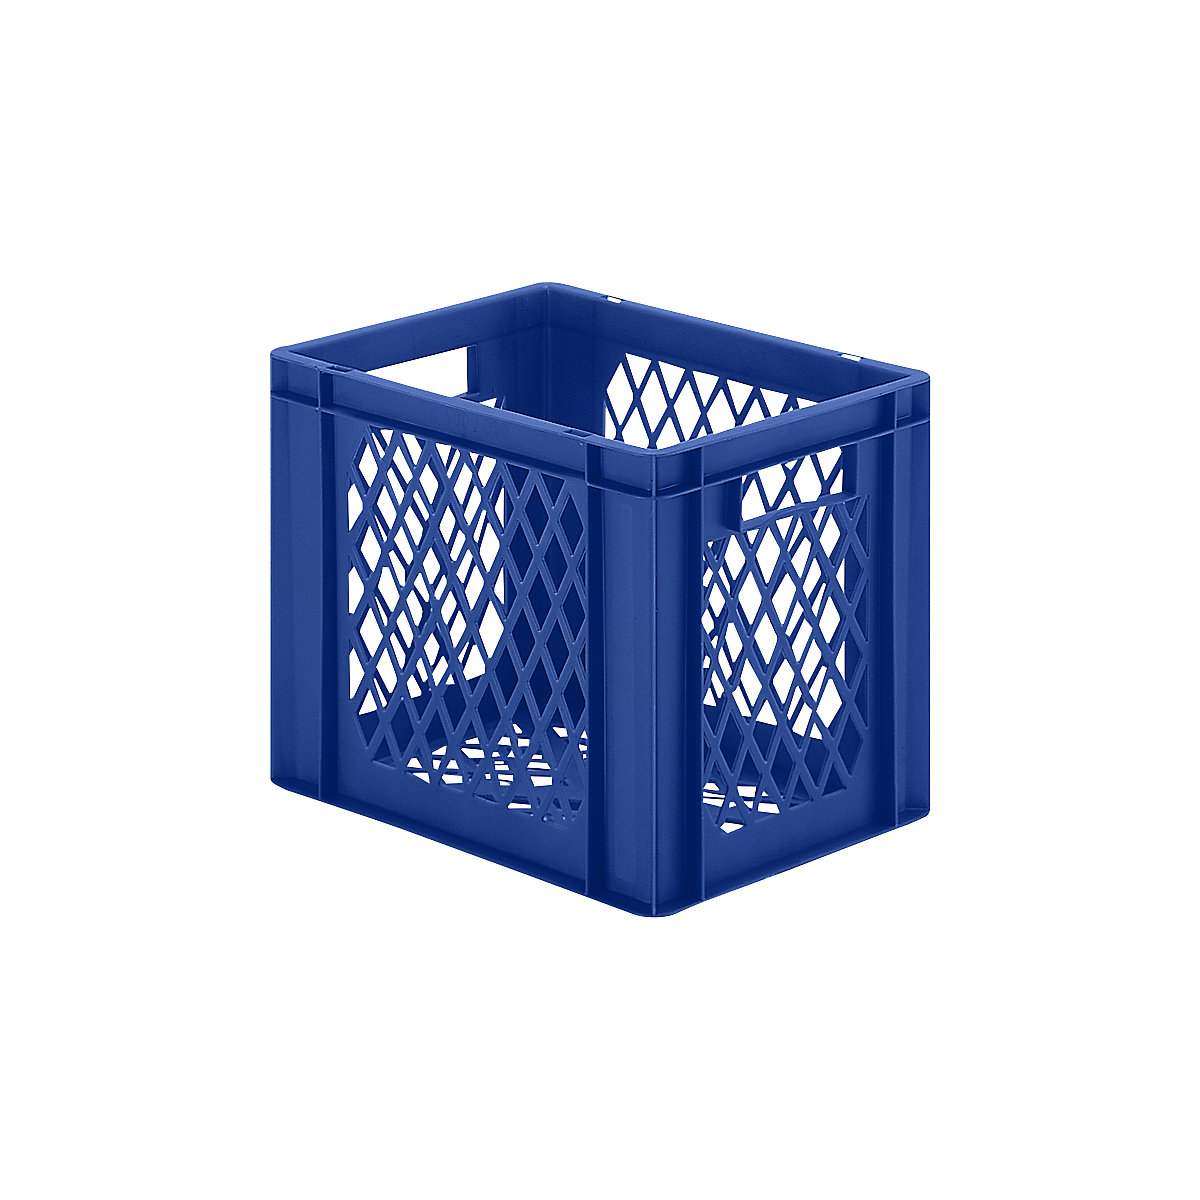 Euro stacking container, perforated walls and base, LxWxH 400 x 300 x 320 mm, blue, pack of 5